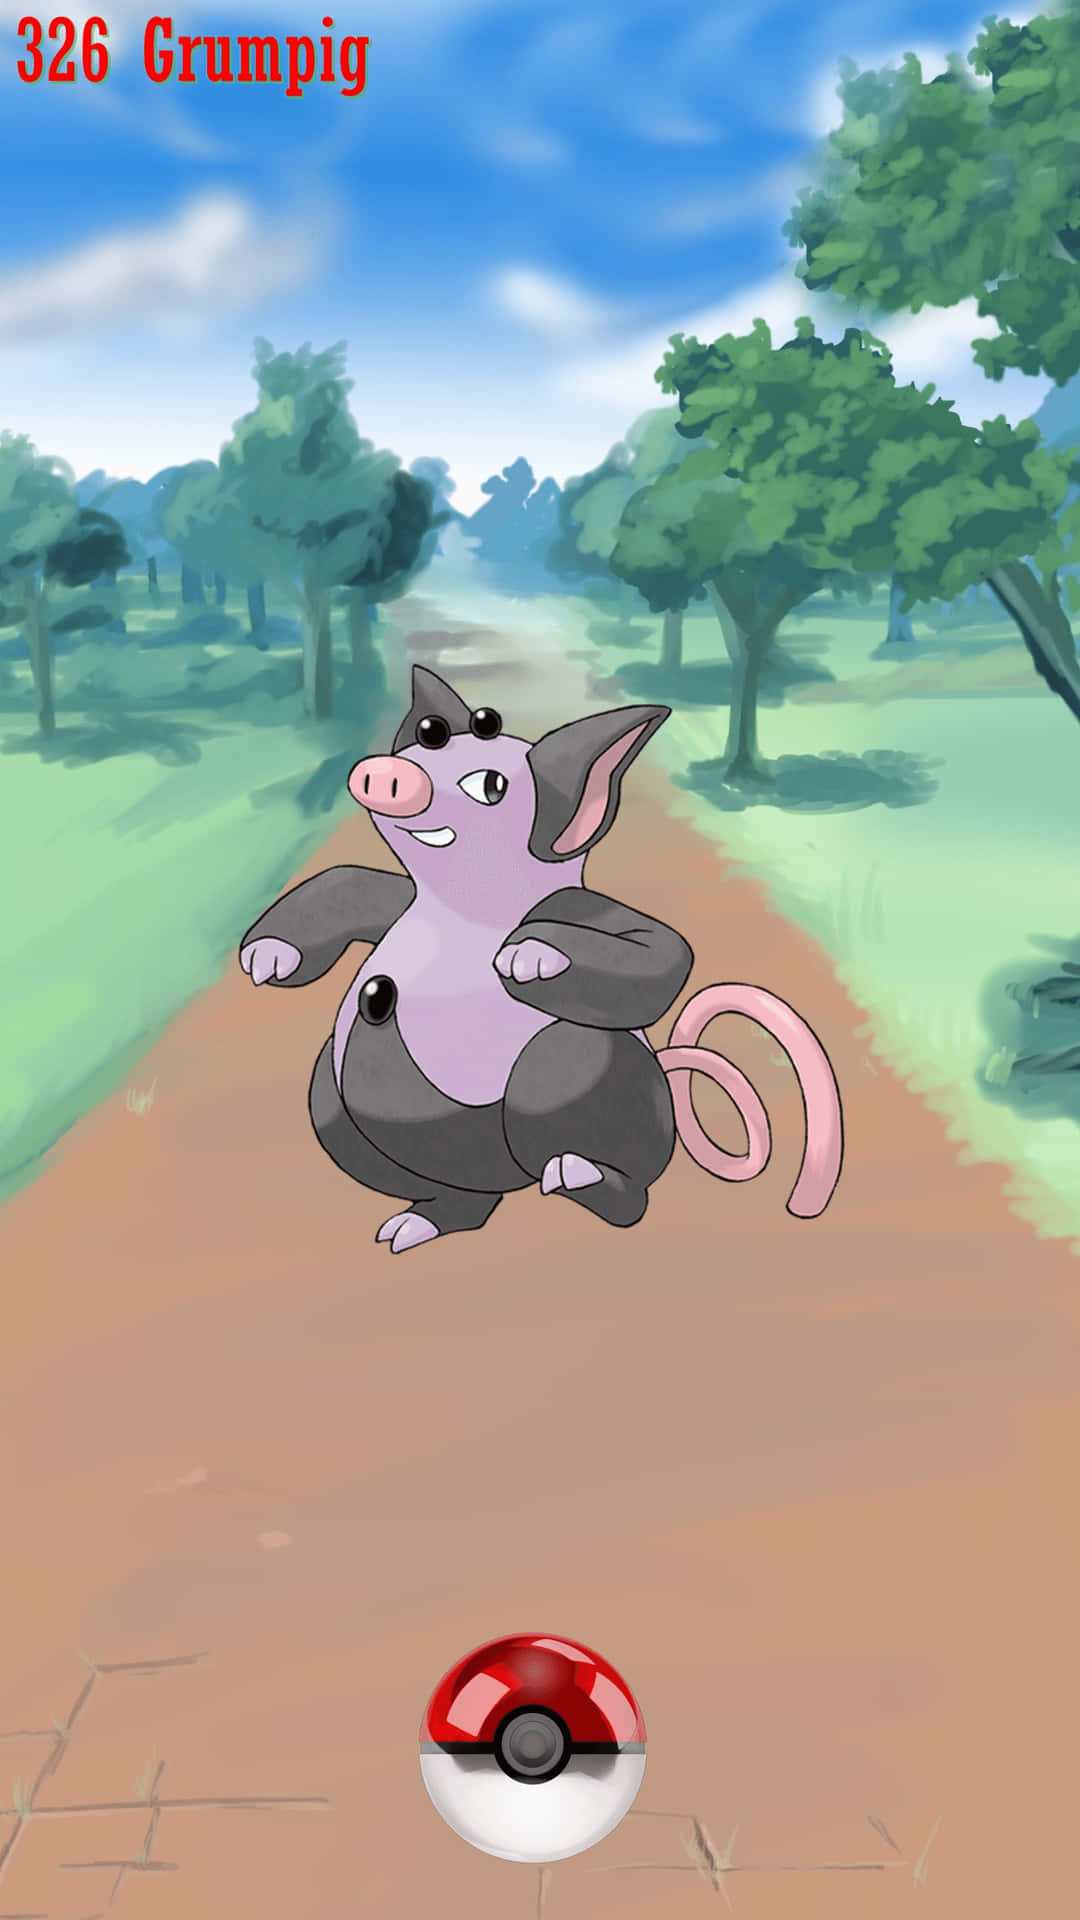 Grumpig With Road And Trees Backdrop Wallpaper